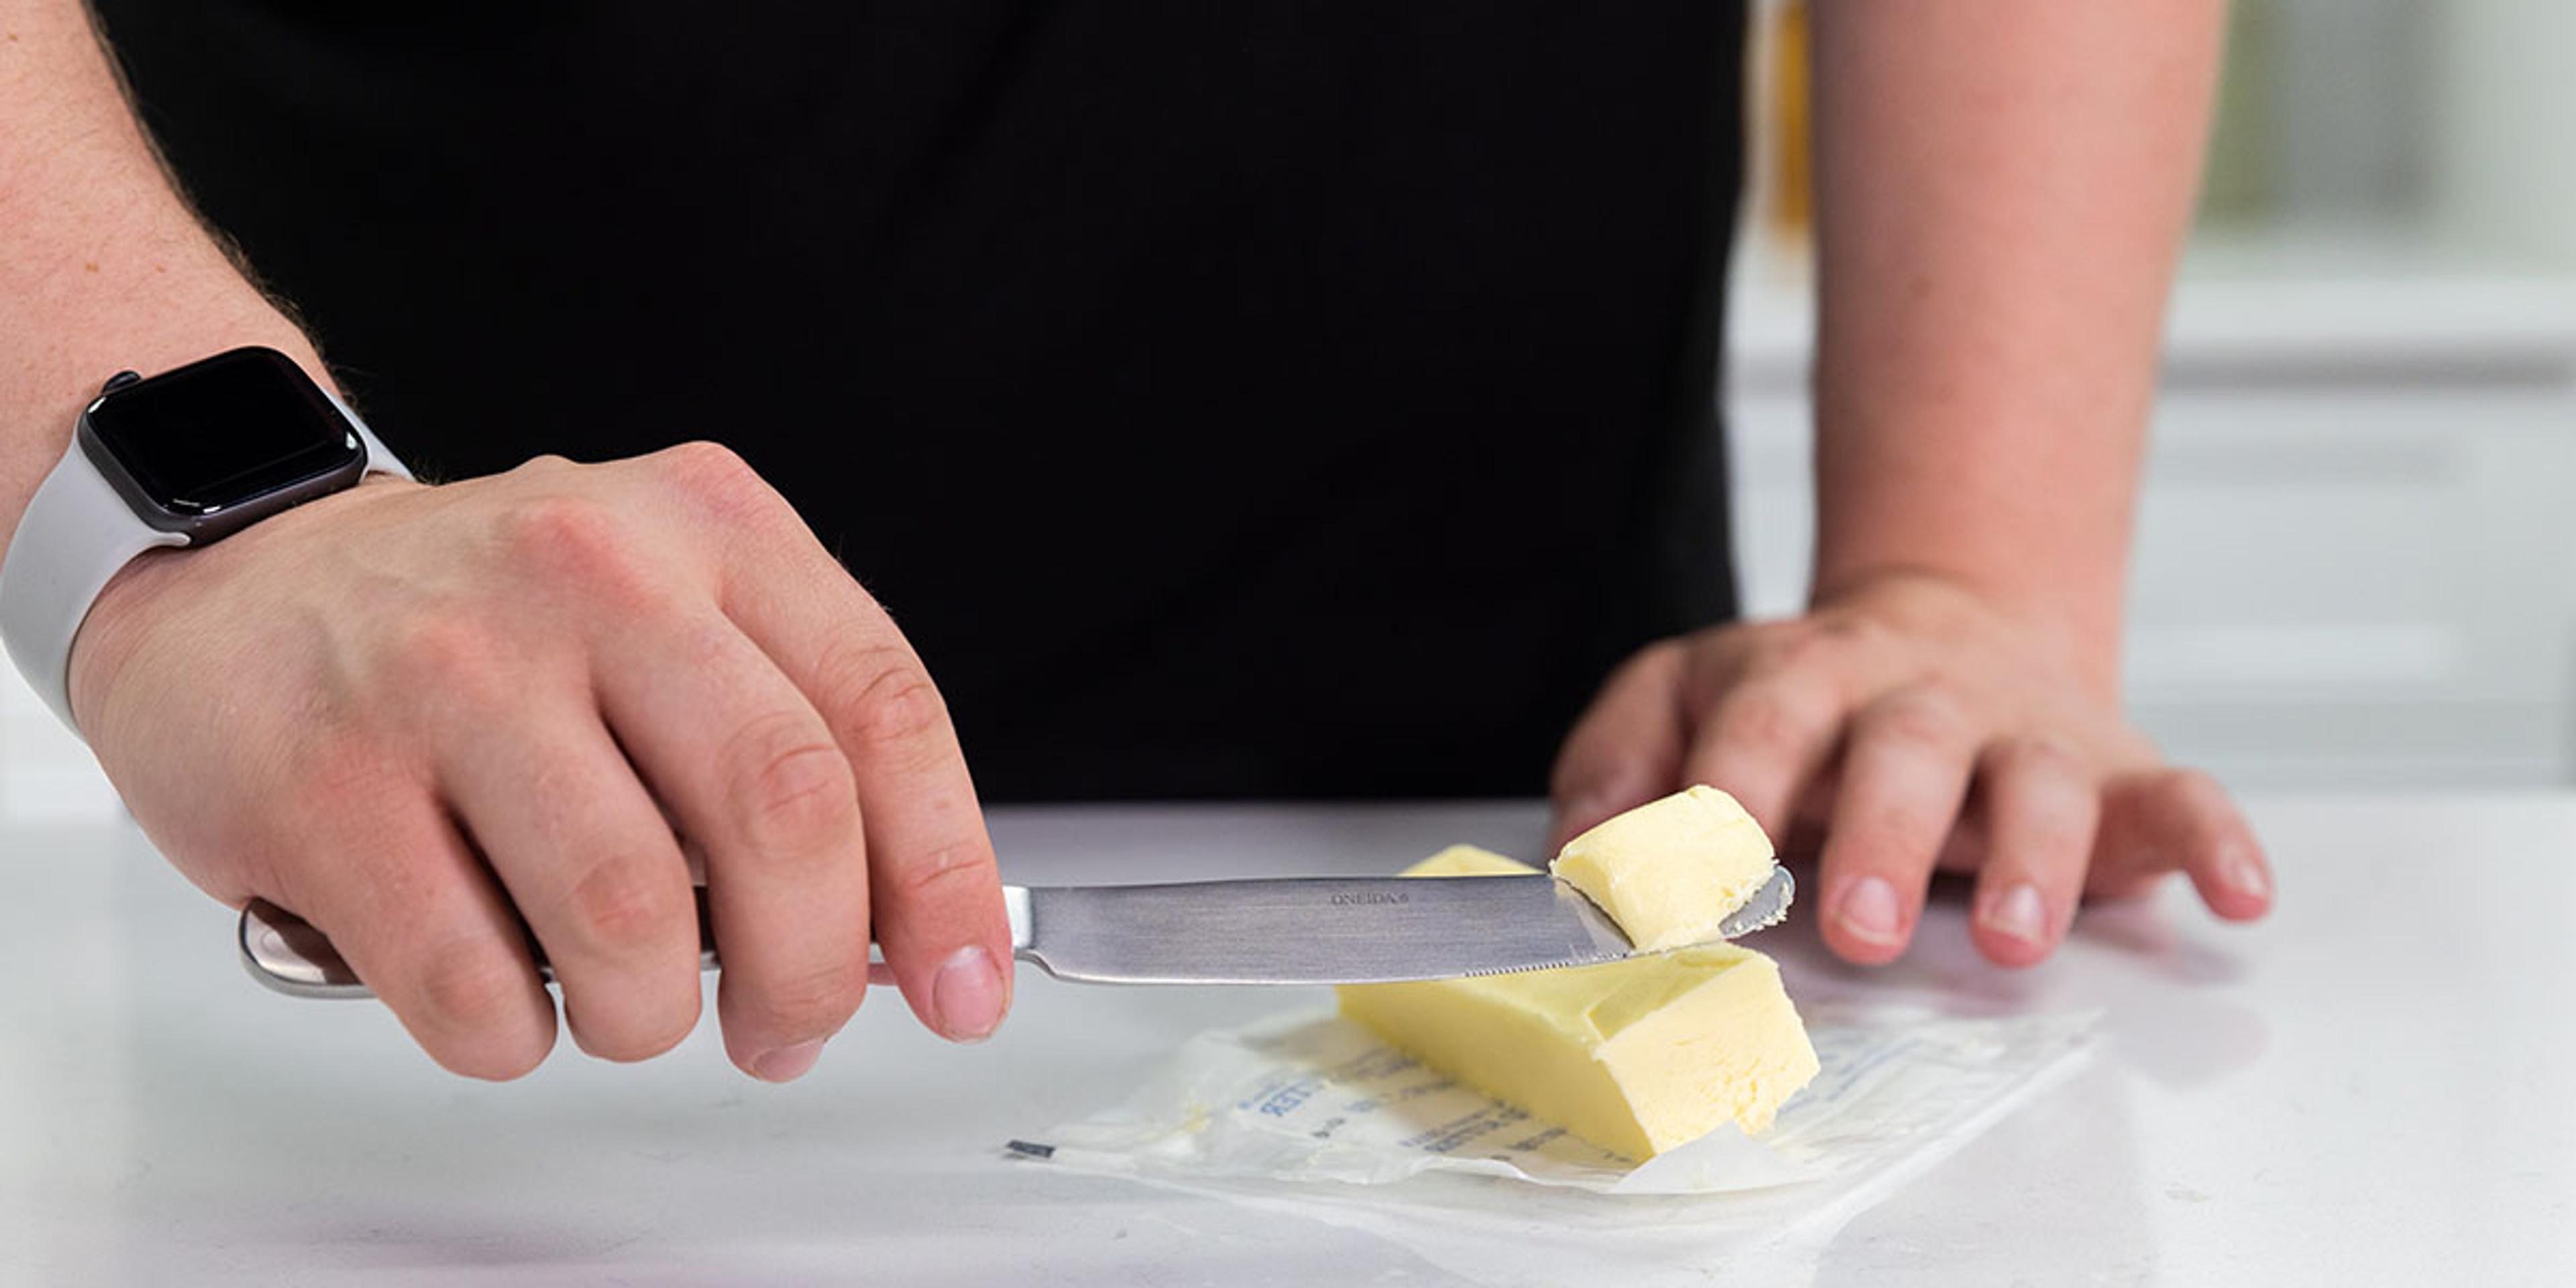  A man cuts organic butter with a knife.